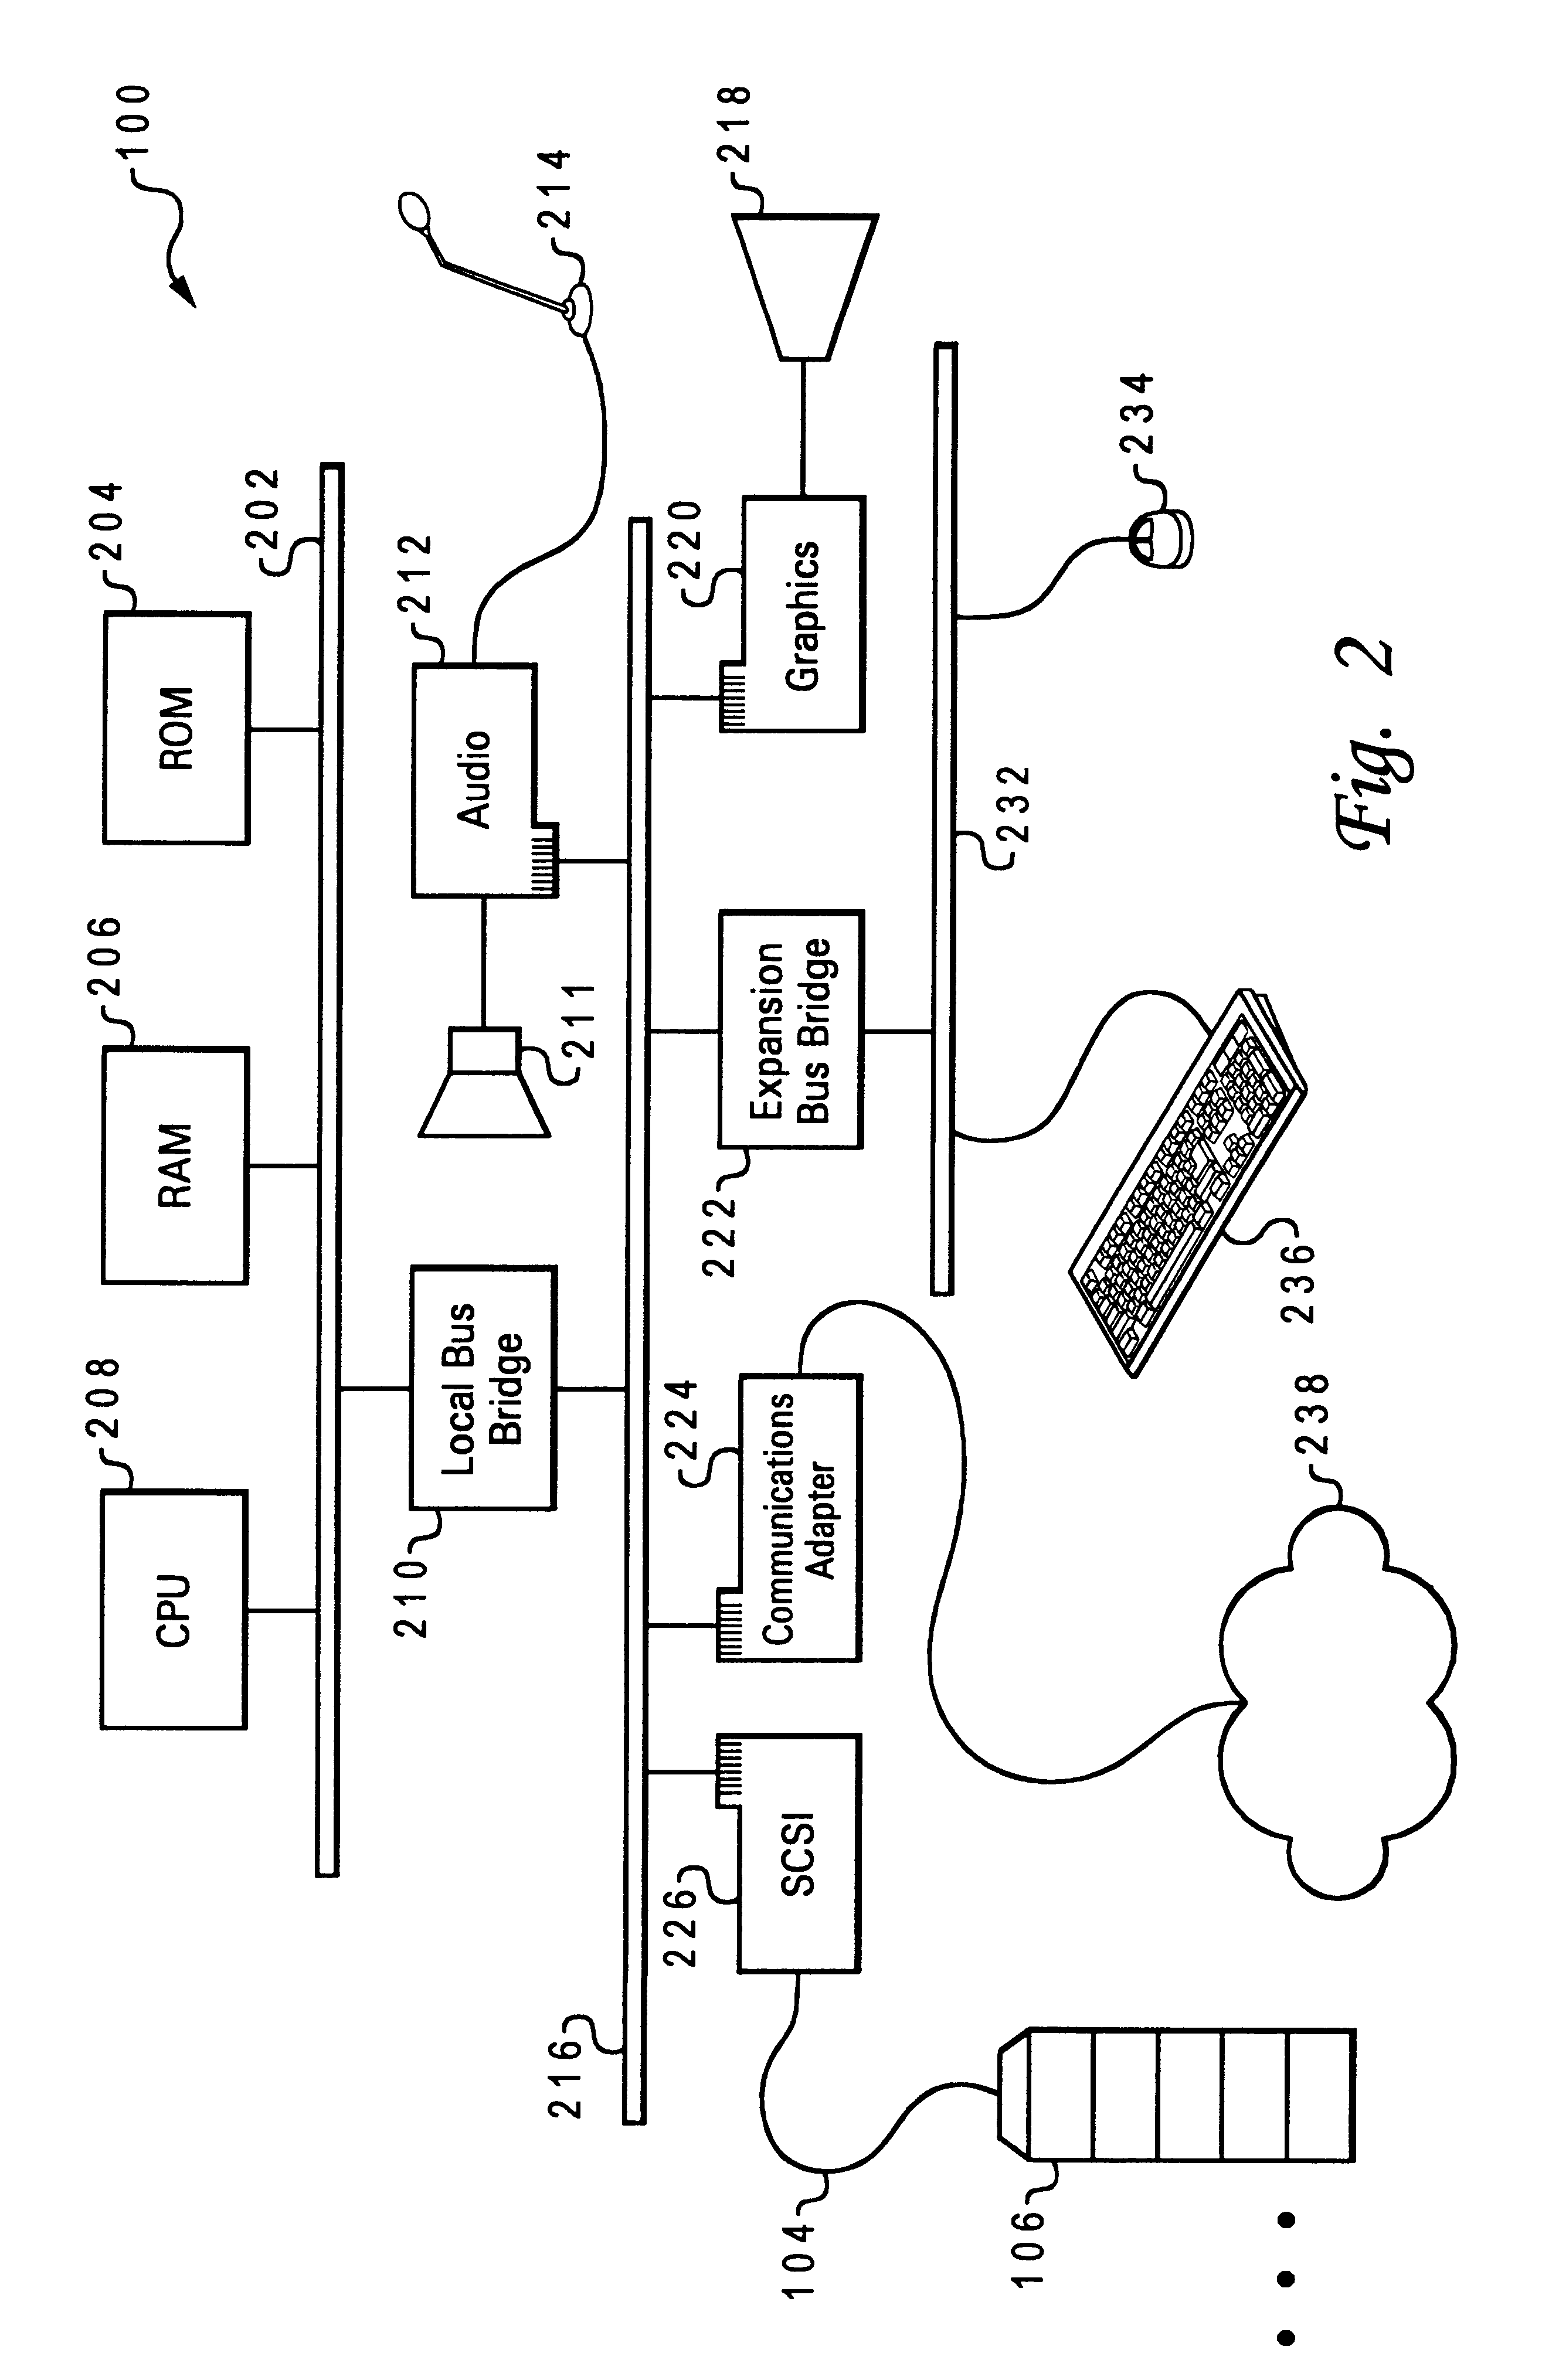 Separable in-line automatic terminator for use with a data processing system bus